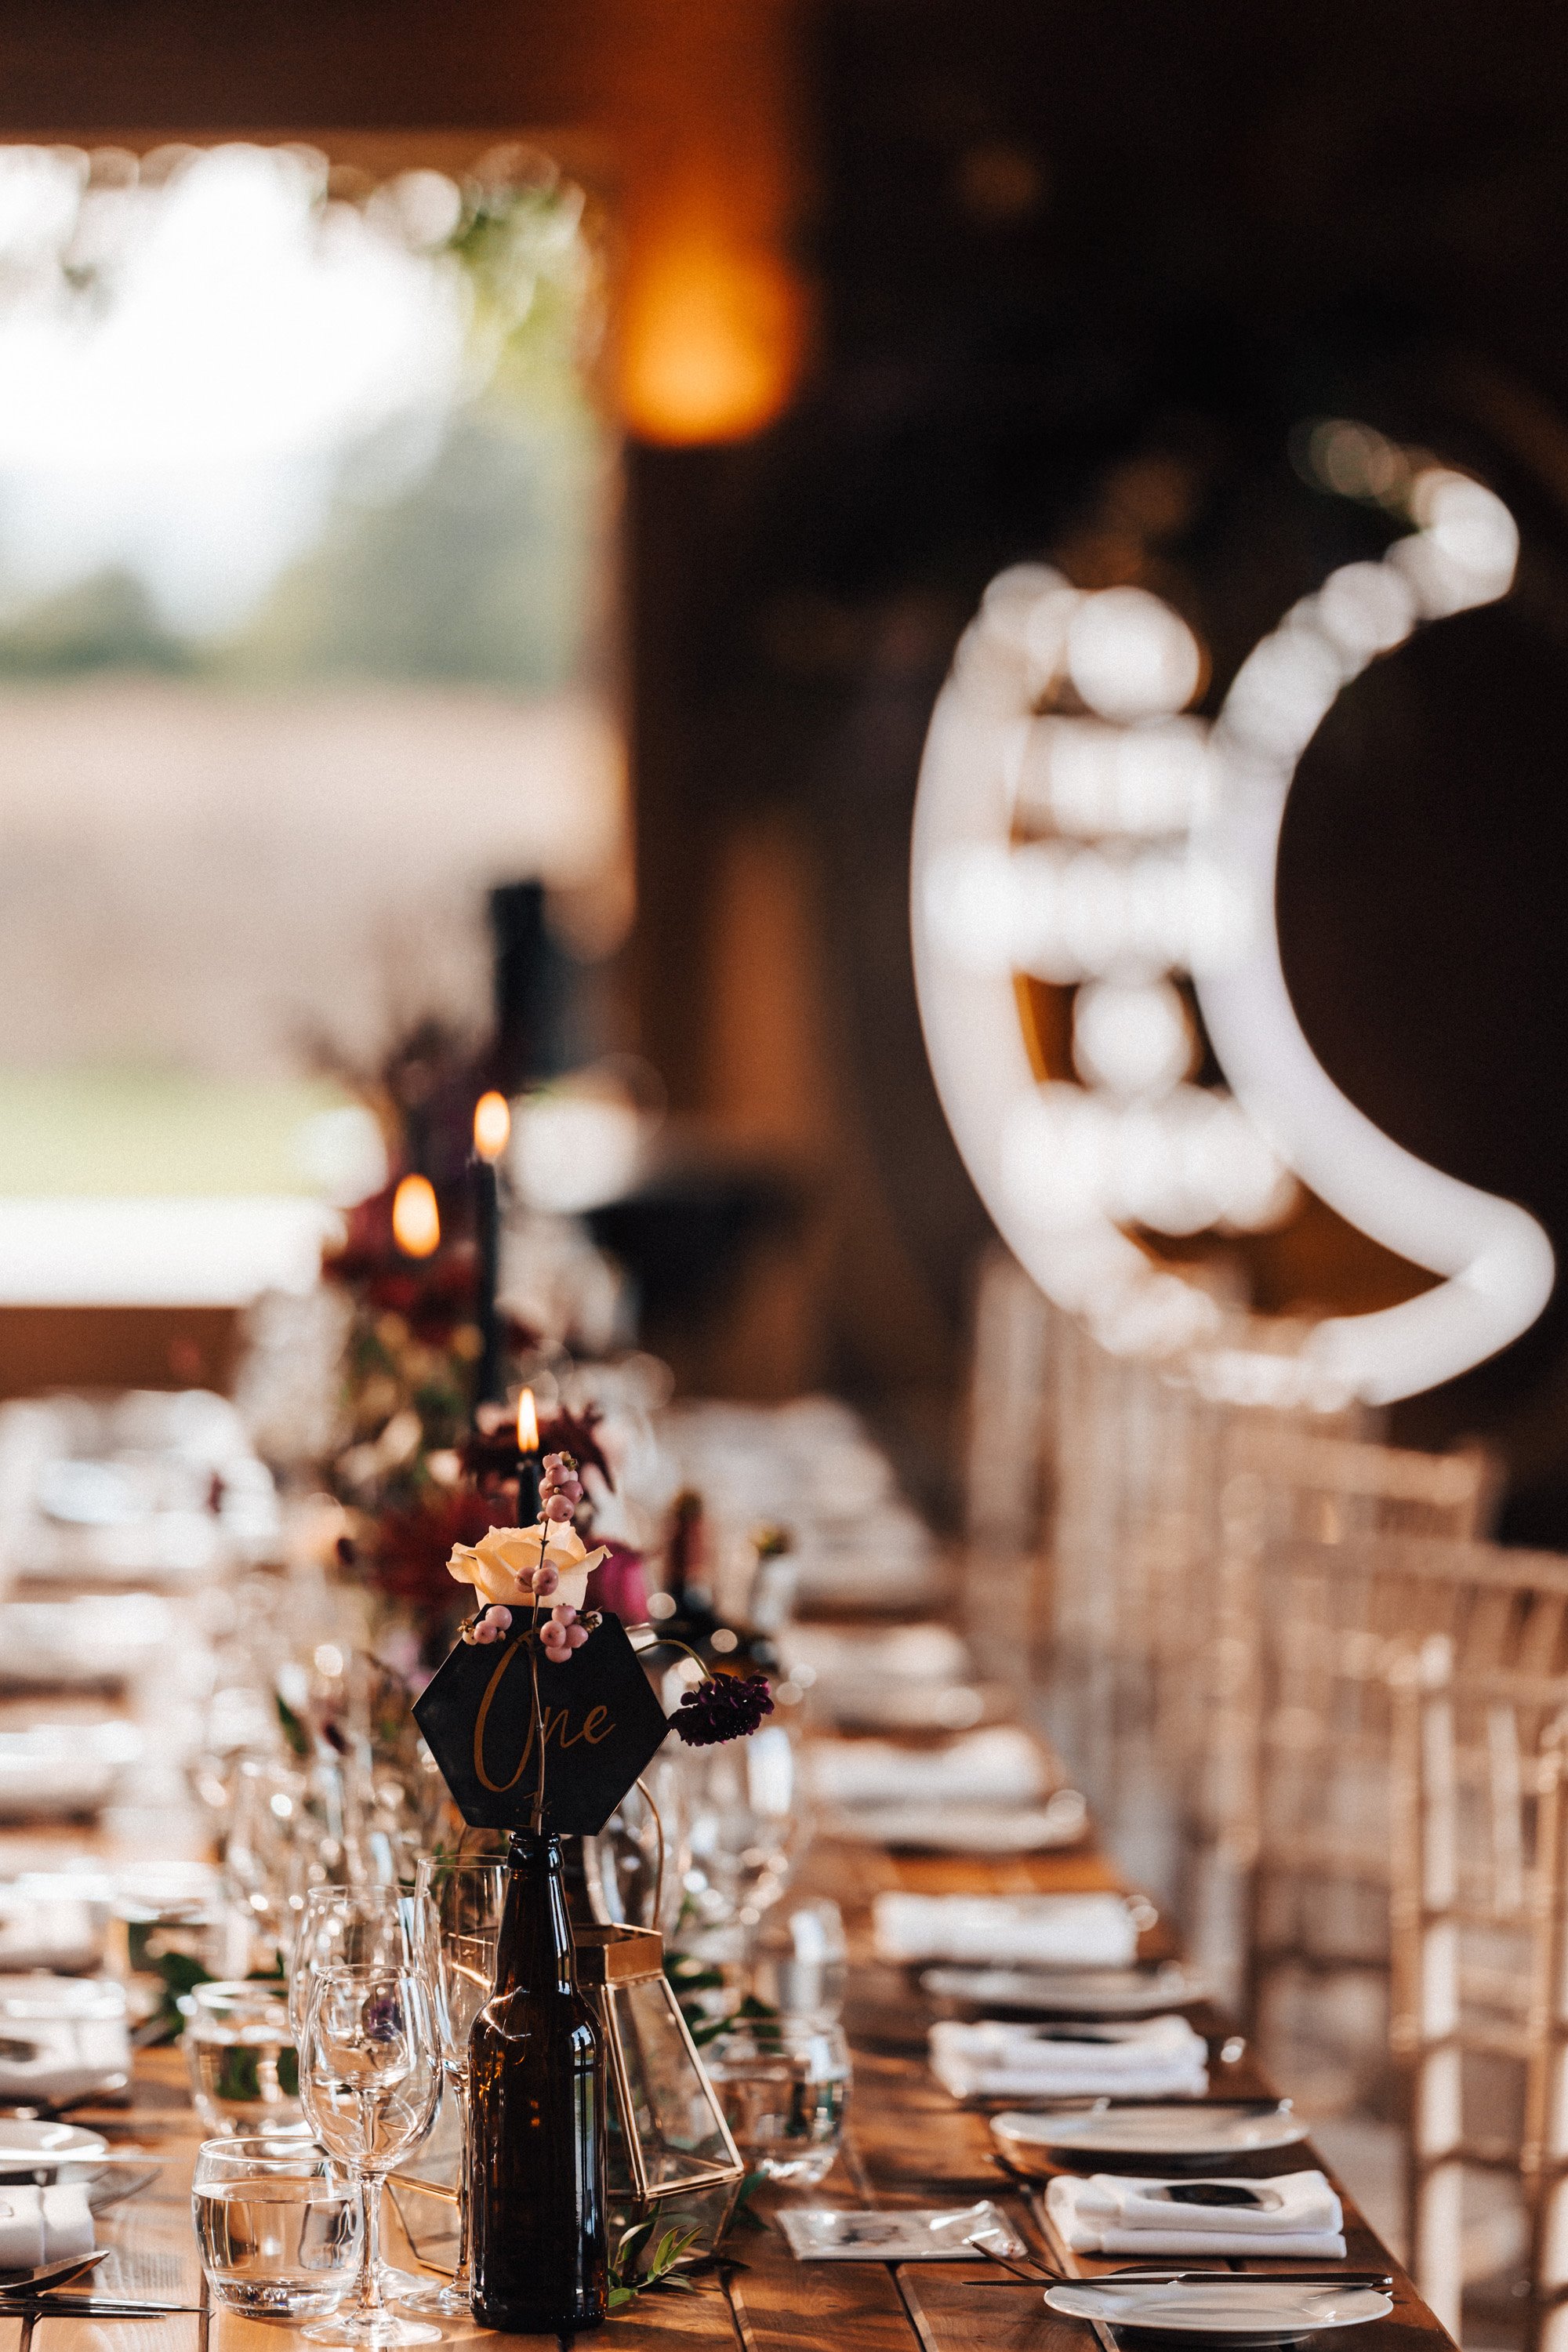 Celestial wedding reception with black cake and candles, autumnal flowers and touches of halloween for a magical celebration in Gloucestershire